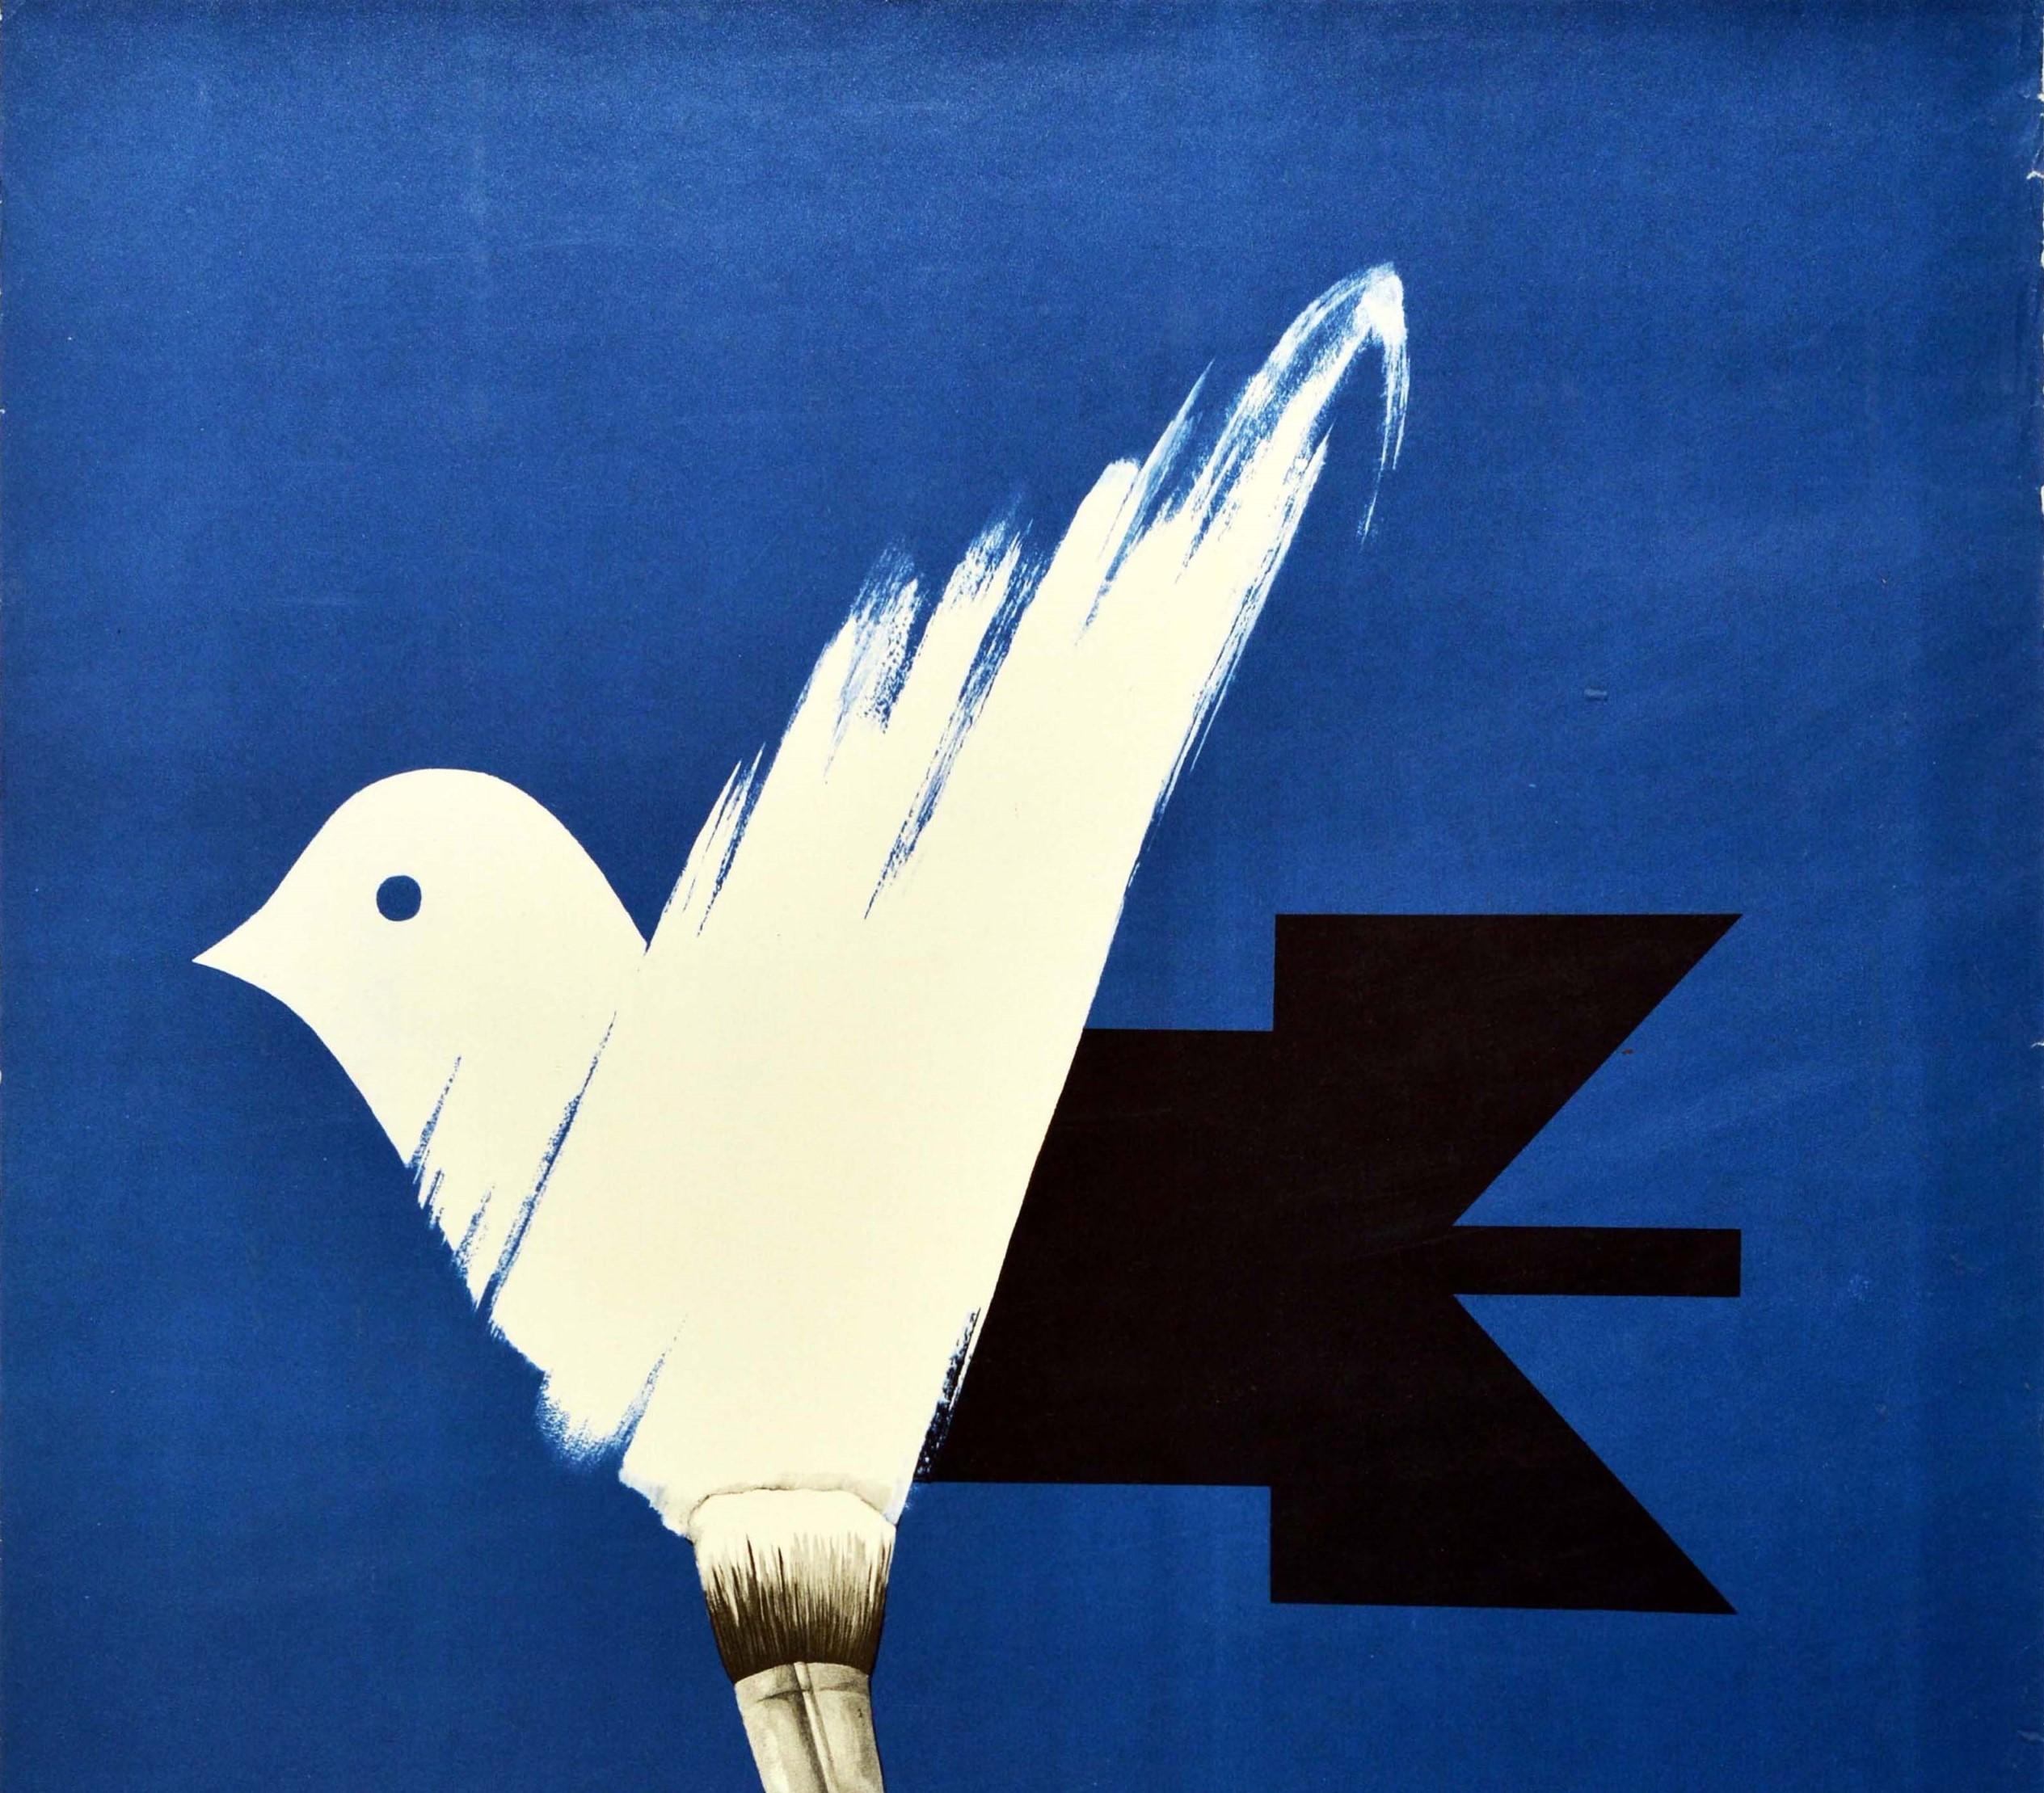 Original vintage propaganda poster - Peace to the World - featuring a great illustration in the colours of the blue, black and white flag of Estonia by the notable Estonian graphic artist and illustrator Made Balbat (b.1960) depicting a white dove